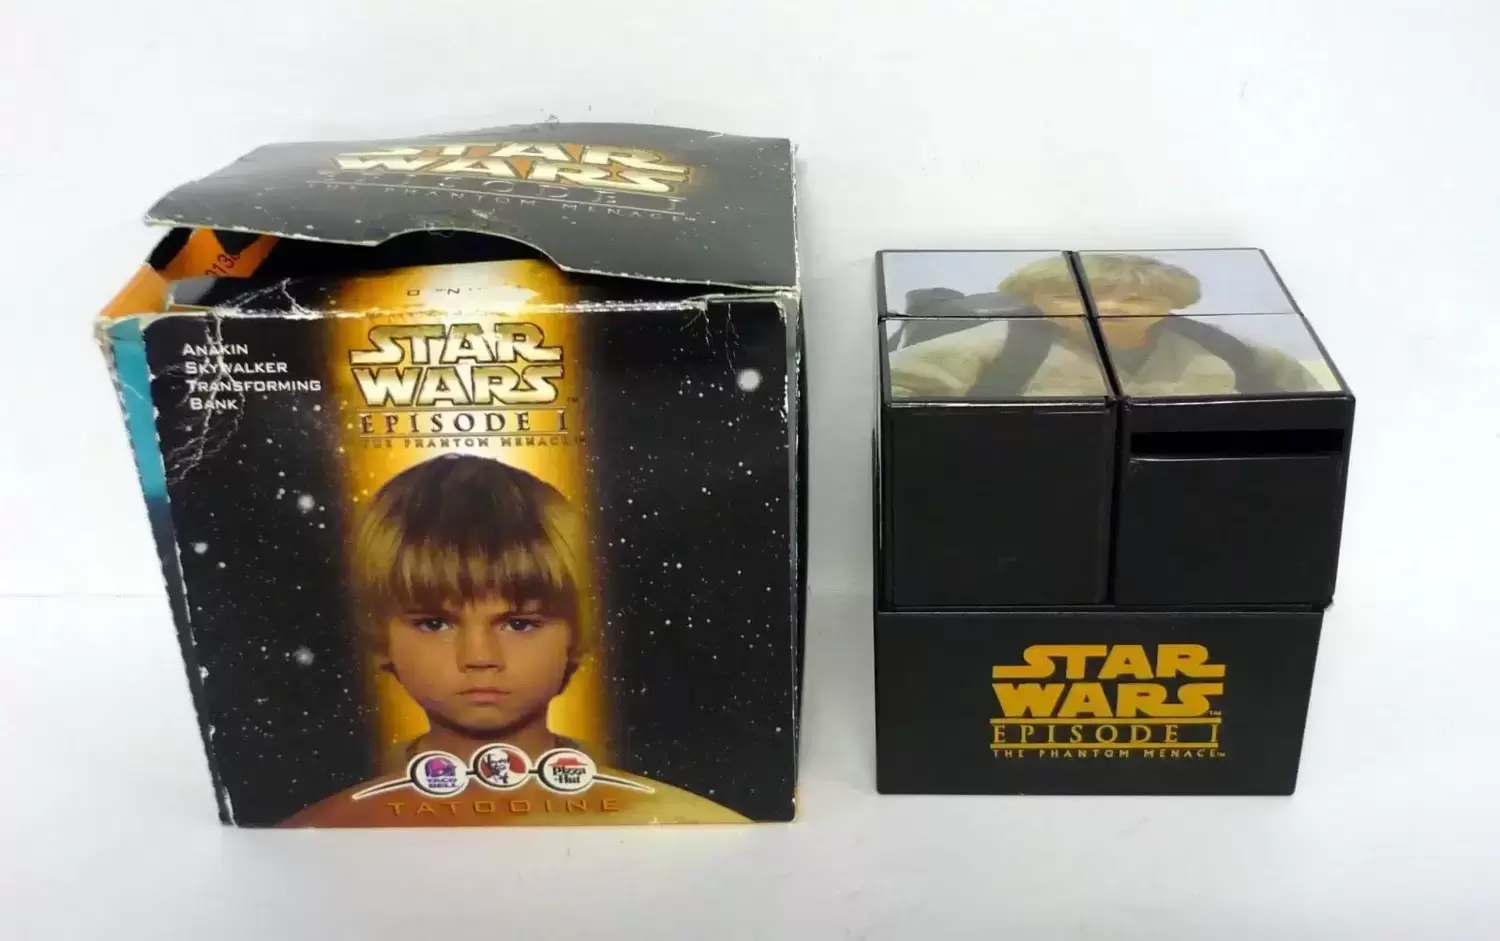 Star Wars Episode I Taco Bell Kid's Meal Toy Tatooine Anakin's Transforming Ban 